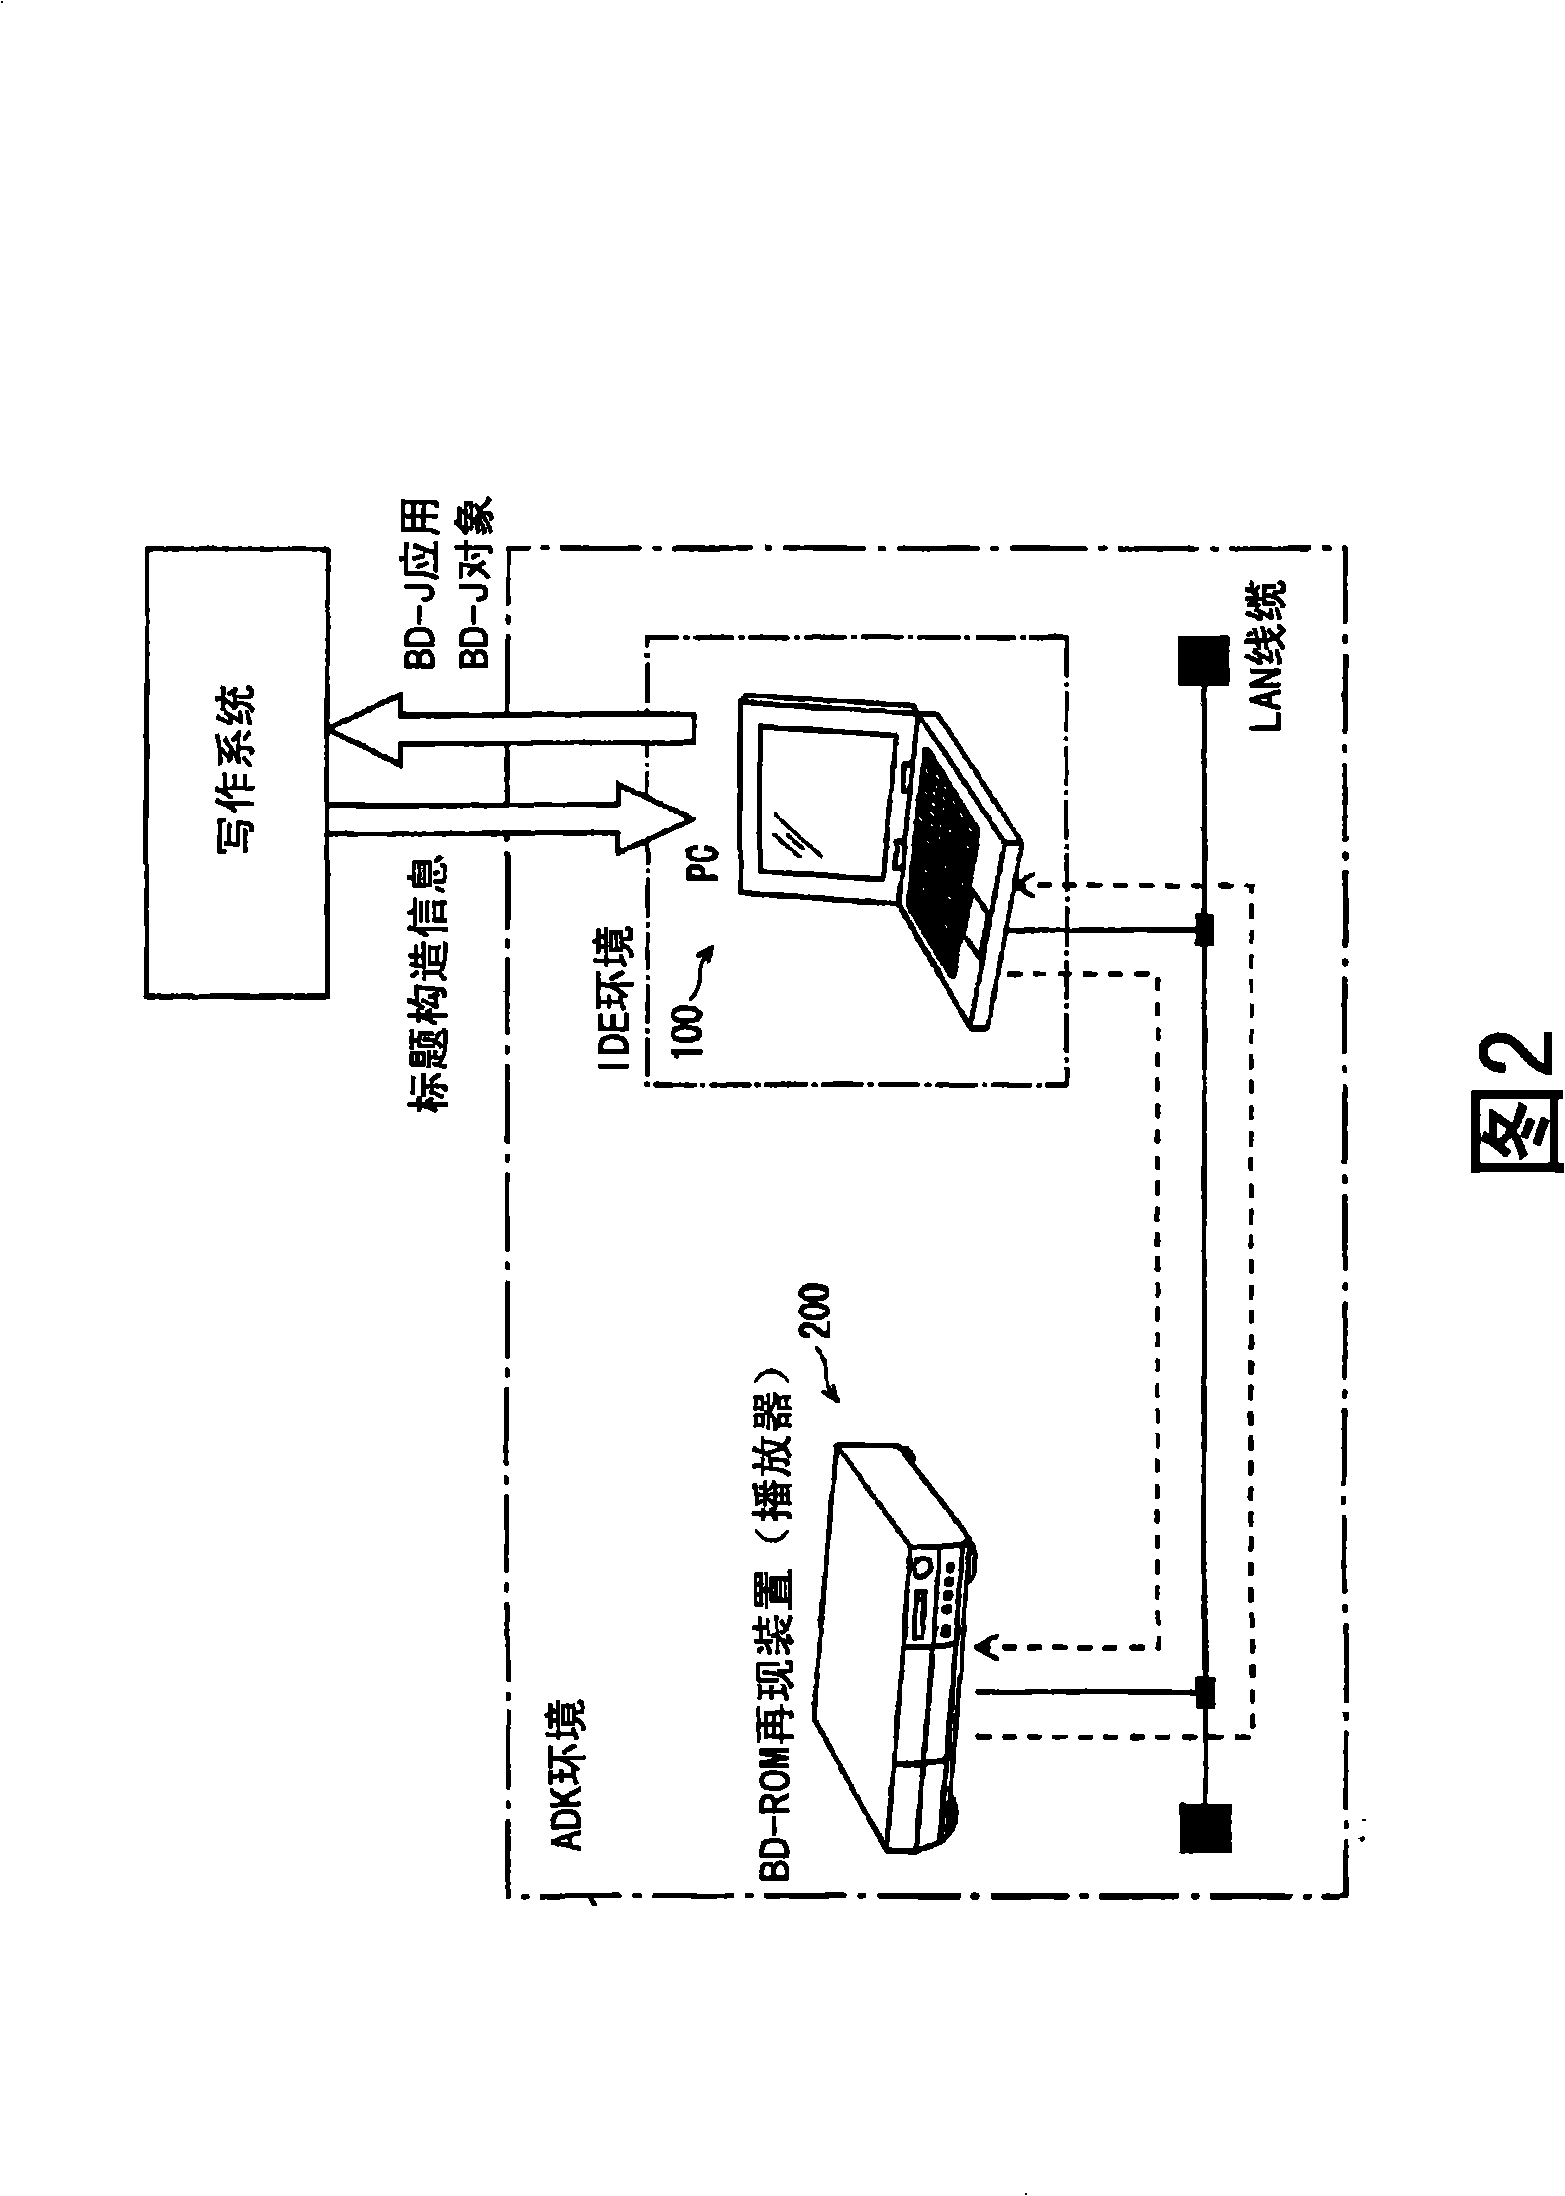 Reproduction device, debug device, system LSI and program